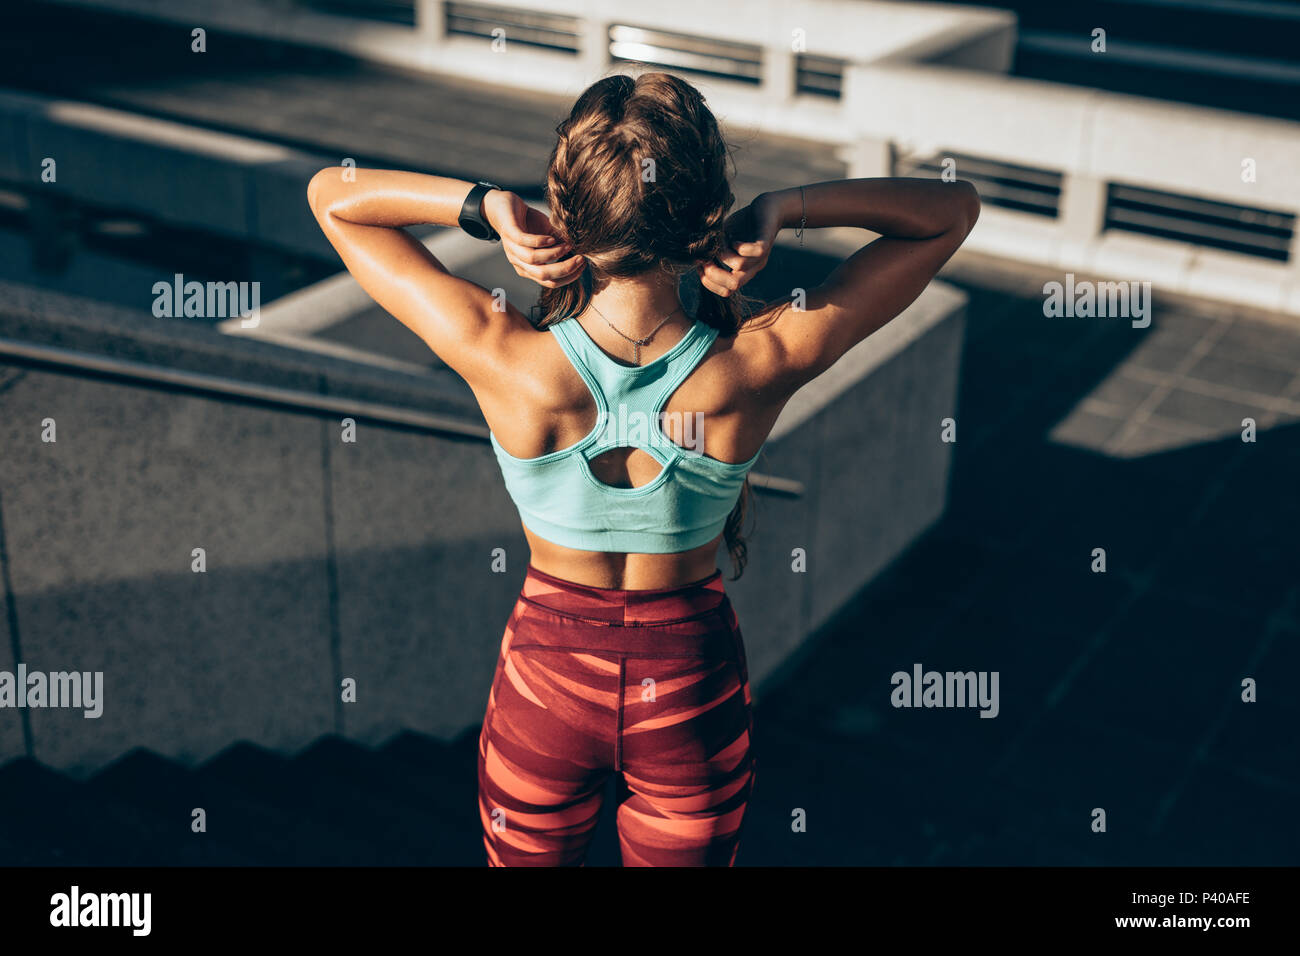 Rear view of fit young woman in sports clothing standing on steps in morning. Female with muscular body ready for workout outdoors. Stock Photo